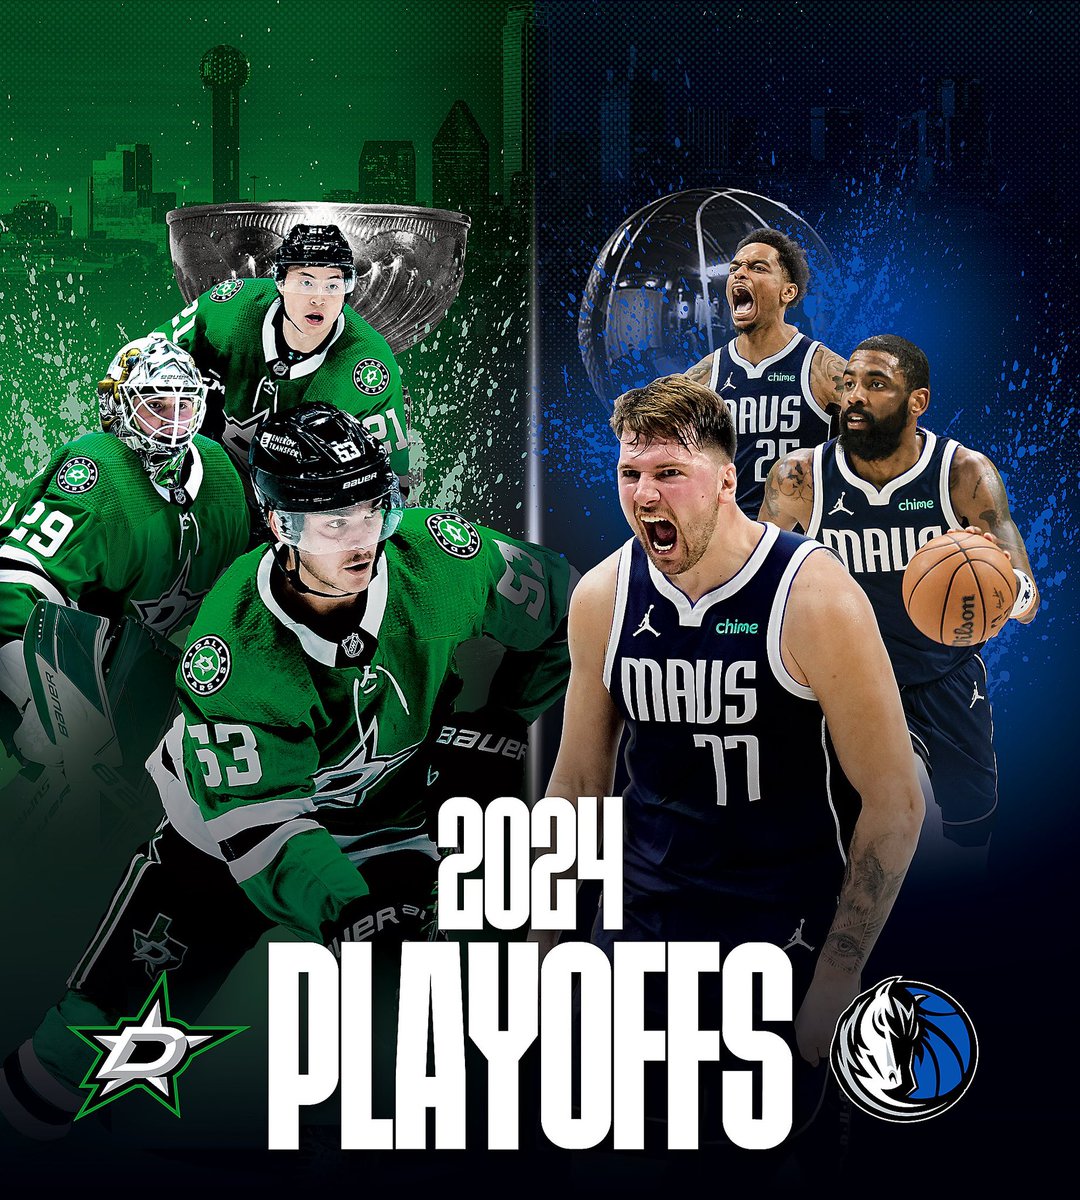 BOTH THE @DallasStars & @dallasmavs ARE MOVING ON TO THE NEXT ROUND IN THE PLAYOFFS!!! BOTH OF THEM CLINCHED THEIR SERIES AT THE @AACenter TO MOVE ON IN THE PLAYOFFS